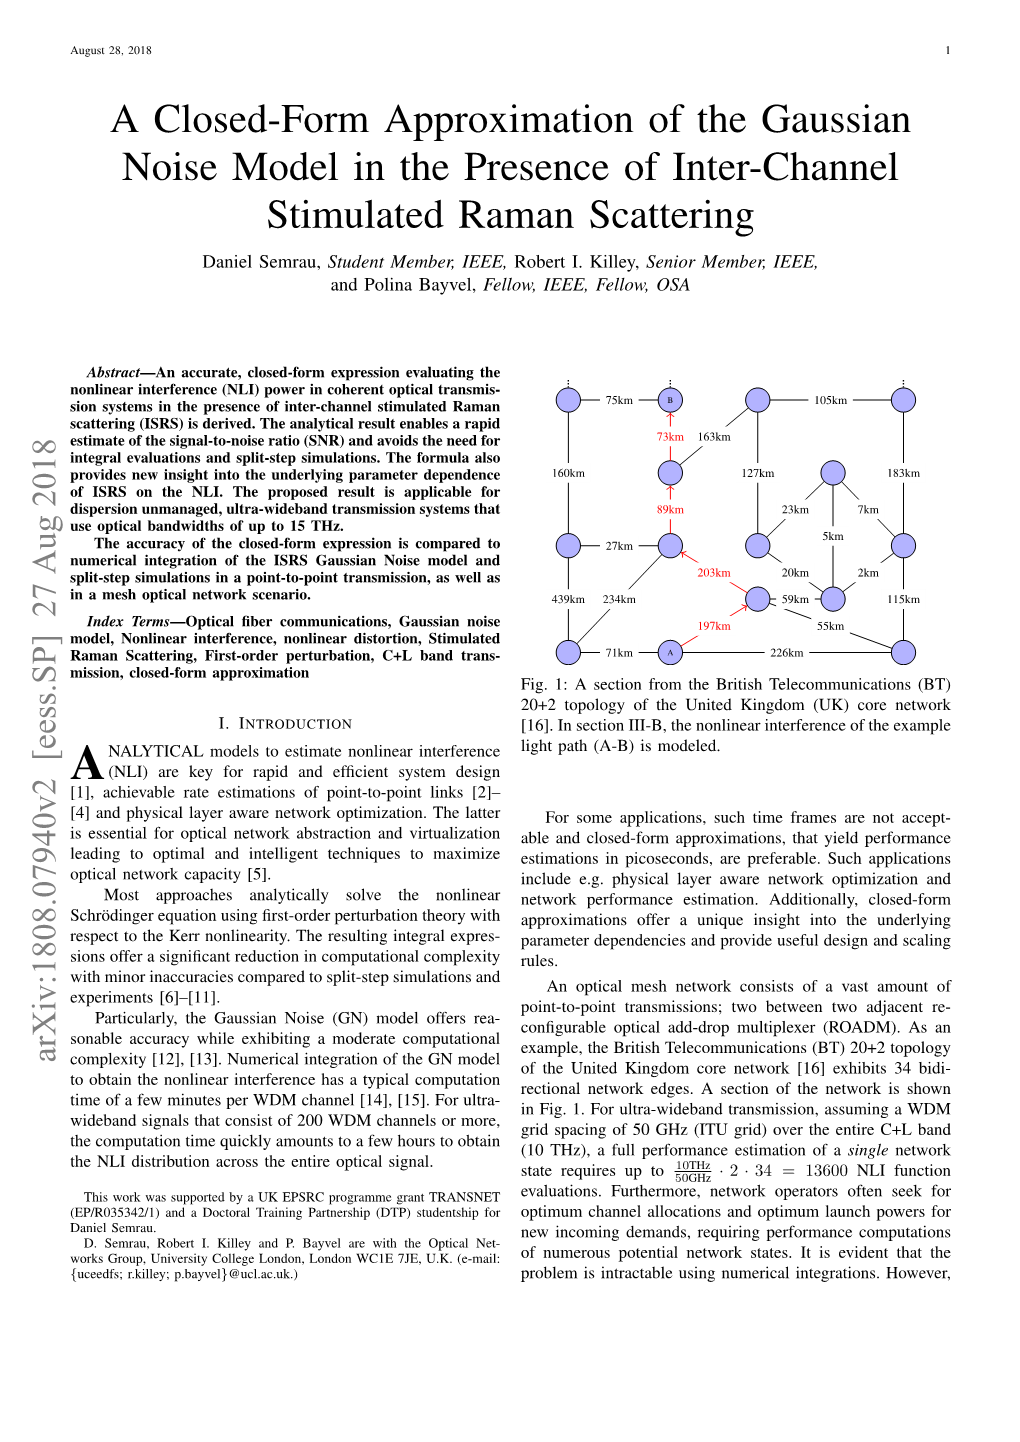 A Closed-Form Approximation of the Gaussian Noise Model in the Presence of Inter-Channel Stimulated Raman Scattering Daniel Semrau, Student Member, IEEE, Robert I